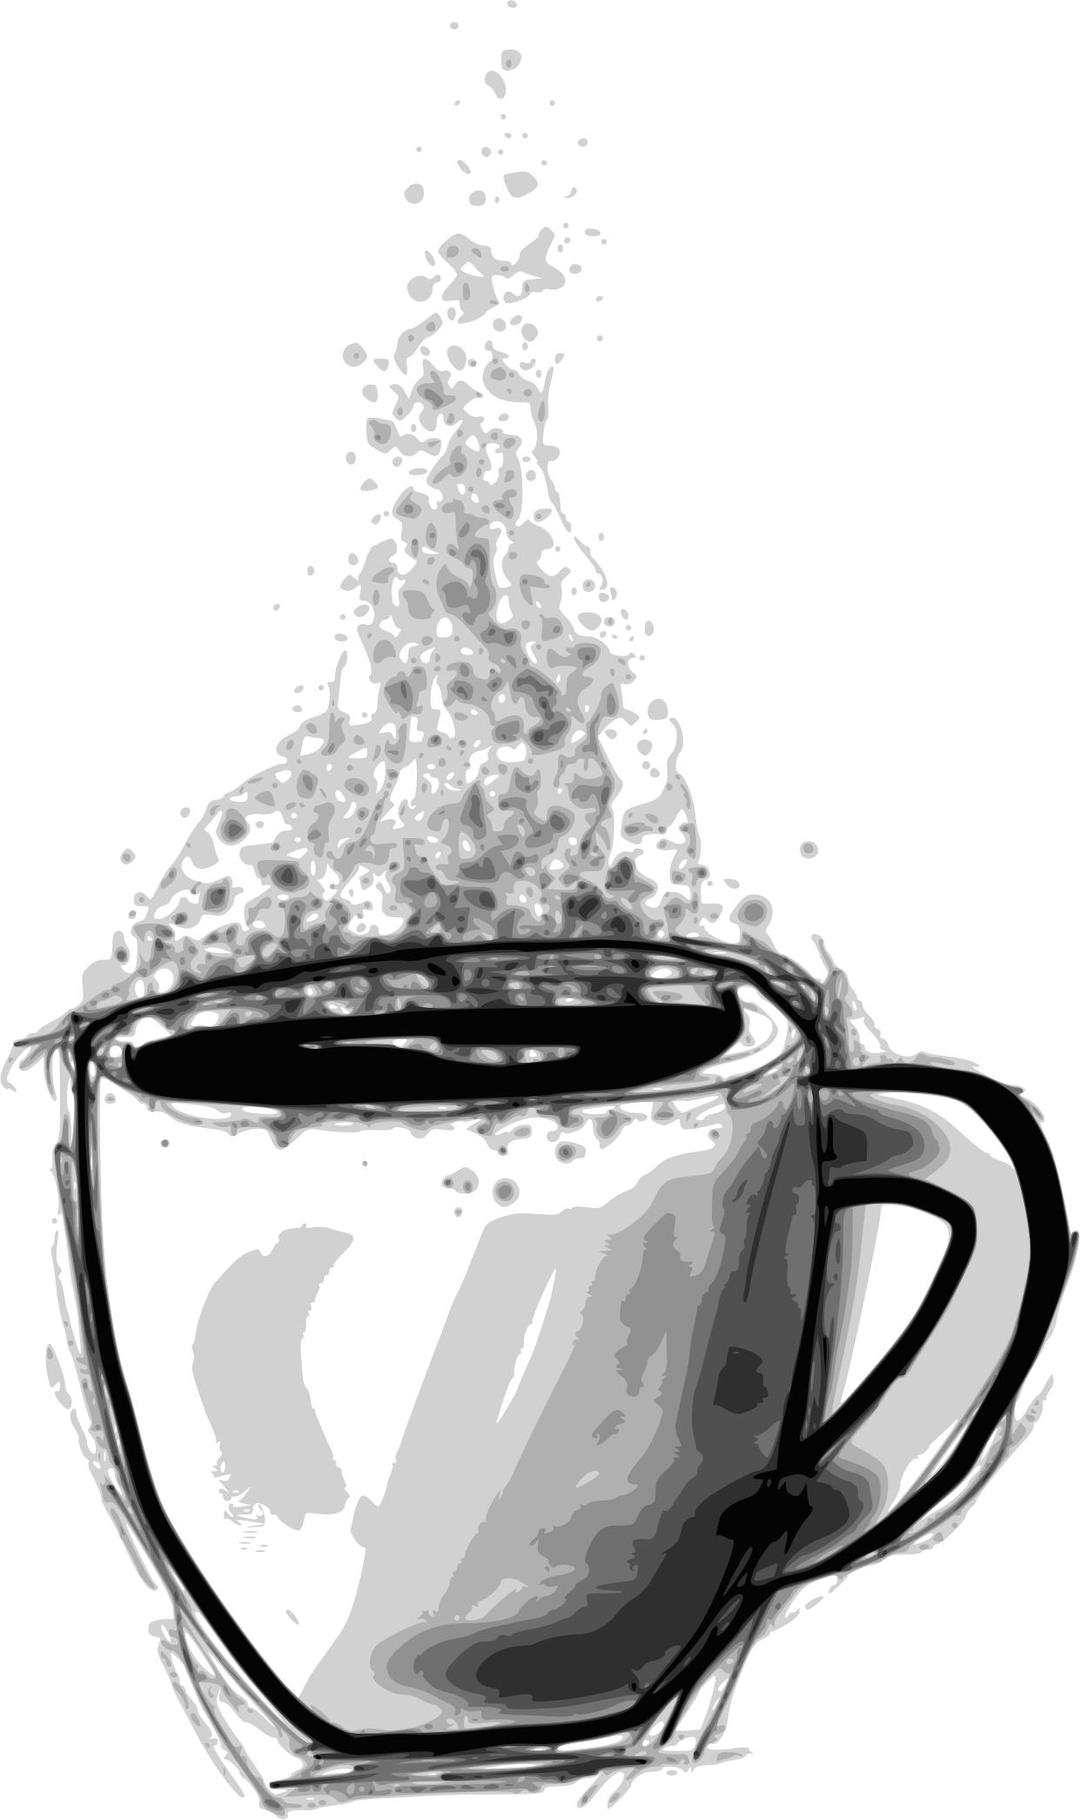 Sketchy Coffee png transparent